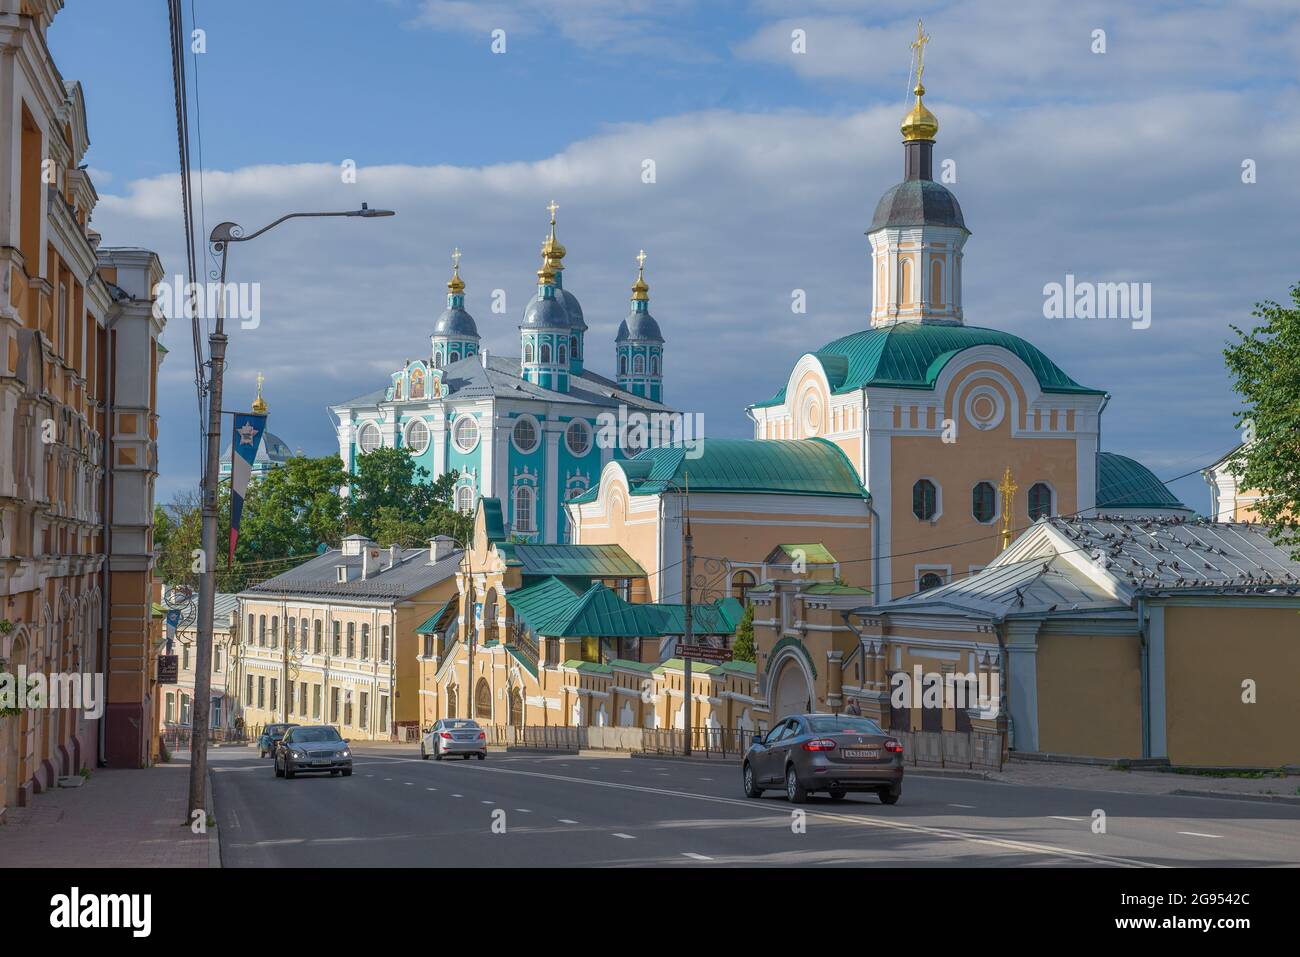 SMOLENSK, RUSSIA - JULY 04, 2021: Holy Trinity Monastery and Assumption Cathedral in the cityscape on a July afternoon Stock Photo